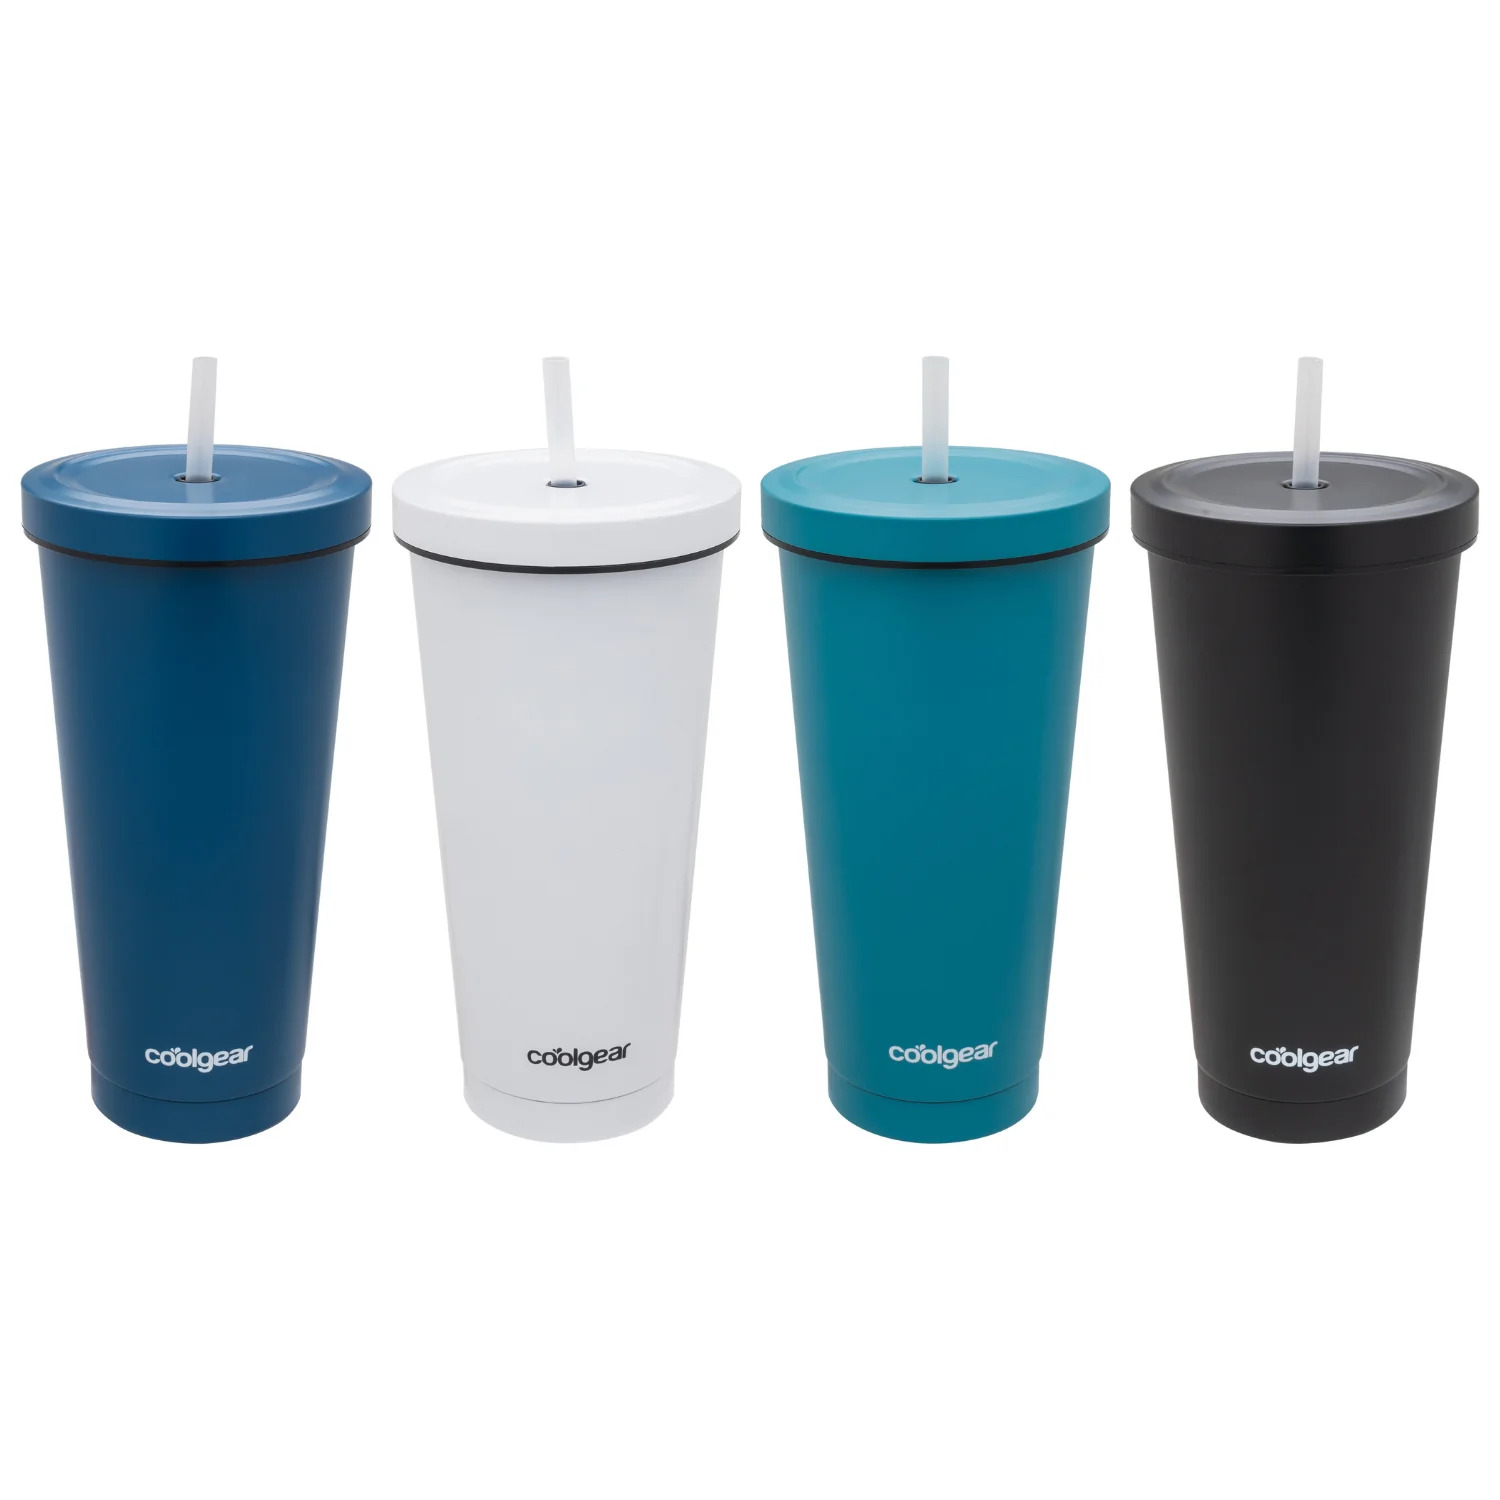 Cool Gear 4-Pack 25 oz Tauton Insulated Stainless Steel Chillers with Twist Top and Reusable Straw | Eco Friendly Travel Tumbler for Home, Work, Gym & More | Keep Drinks Cold For Hours - image 1 of 2